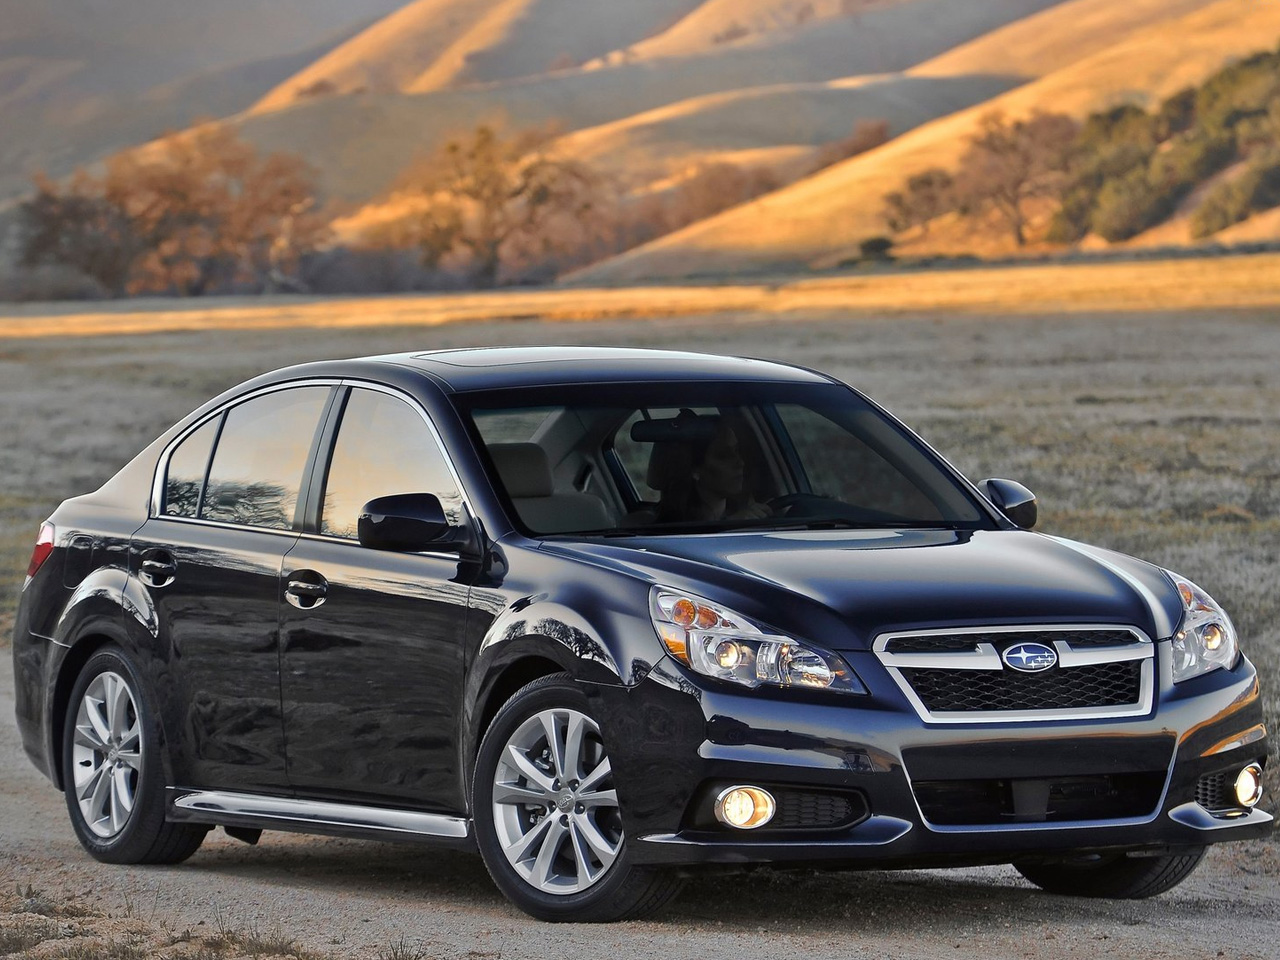 The 2013 Subaru Legacy is an overlooked gem in the mid-size sedan market